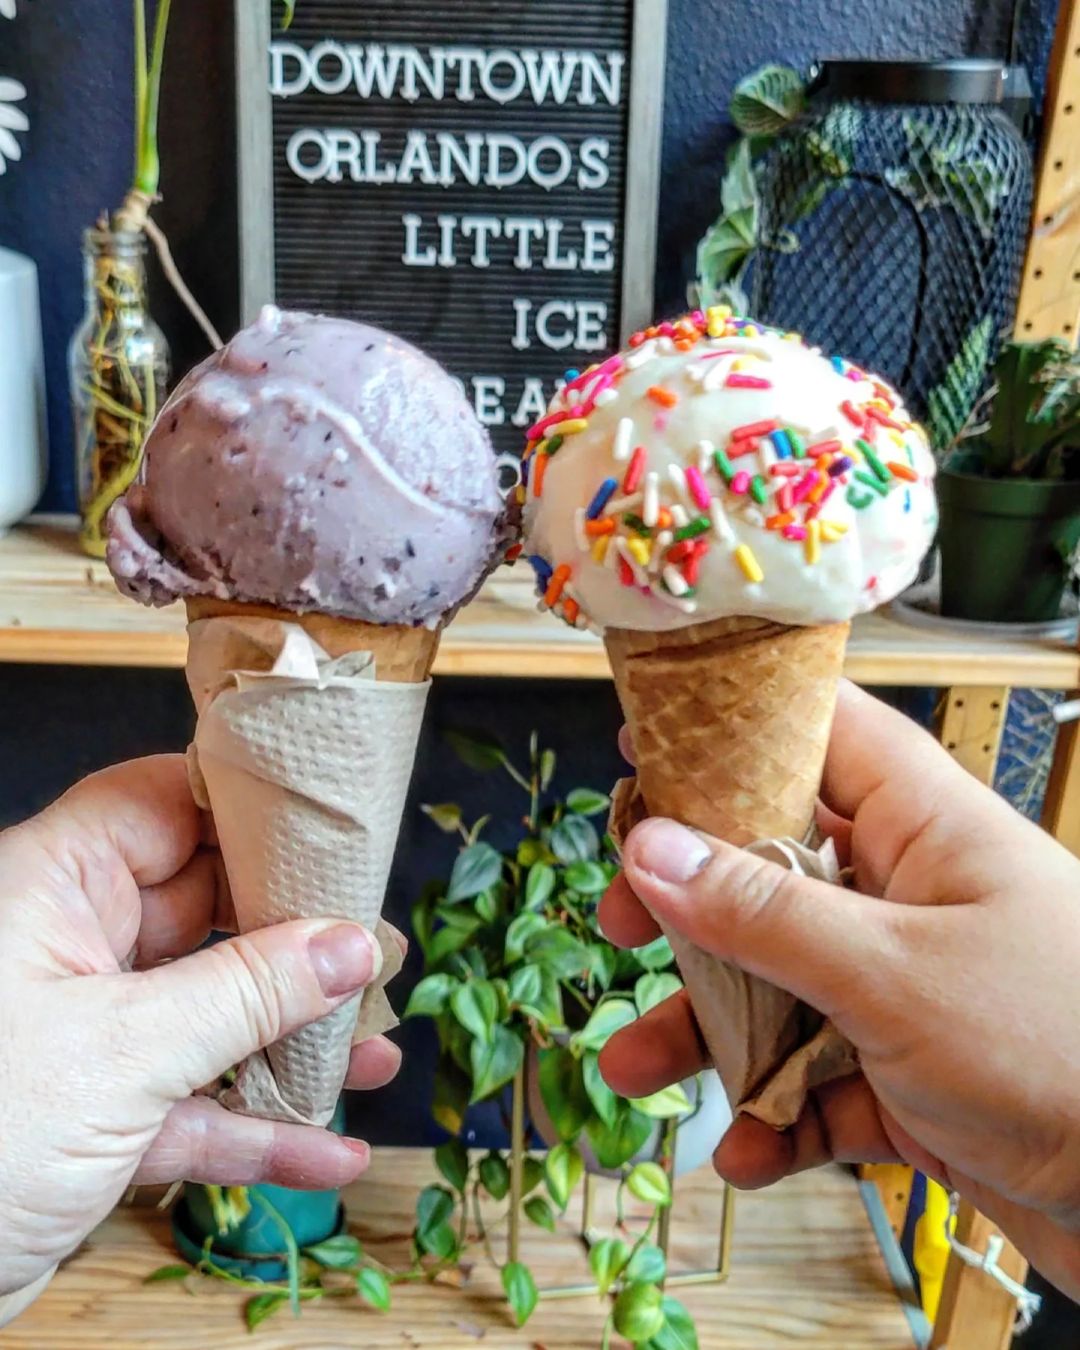 Two people holding vegan ice cream from The Greenery Creamery